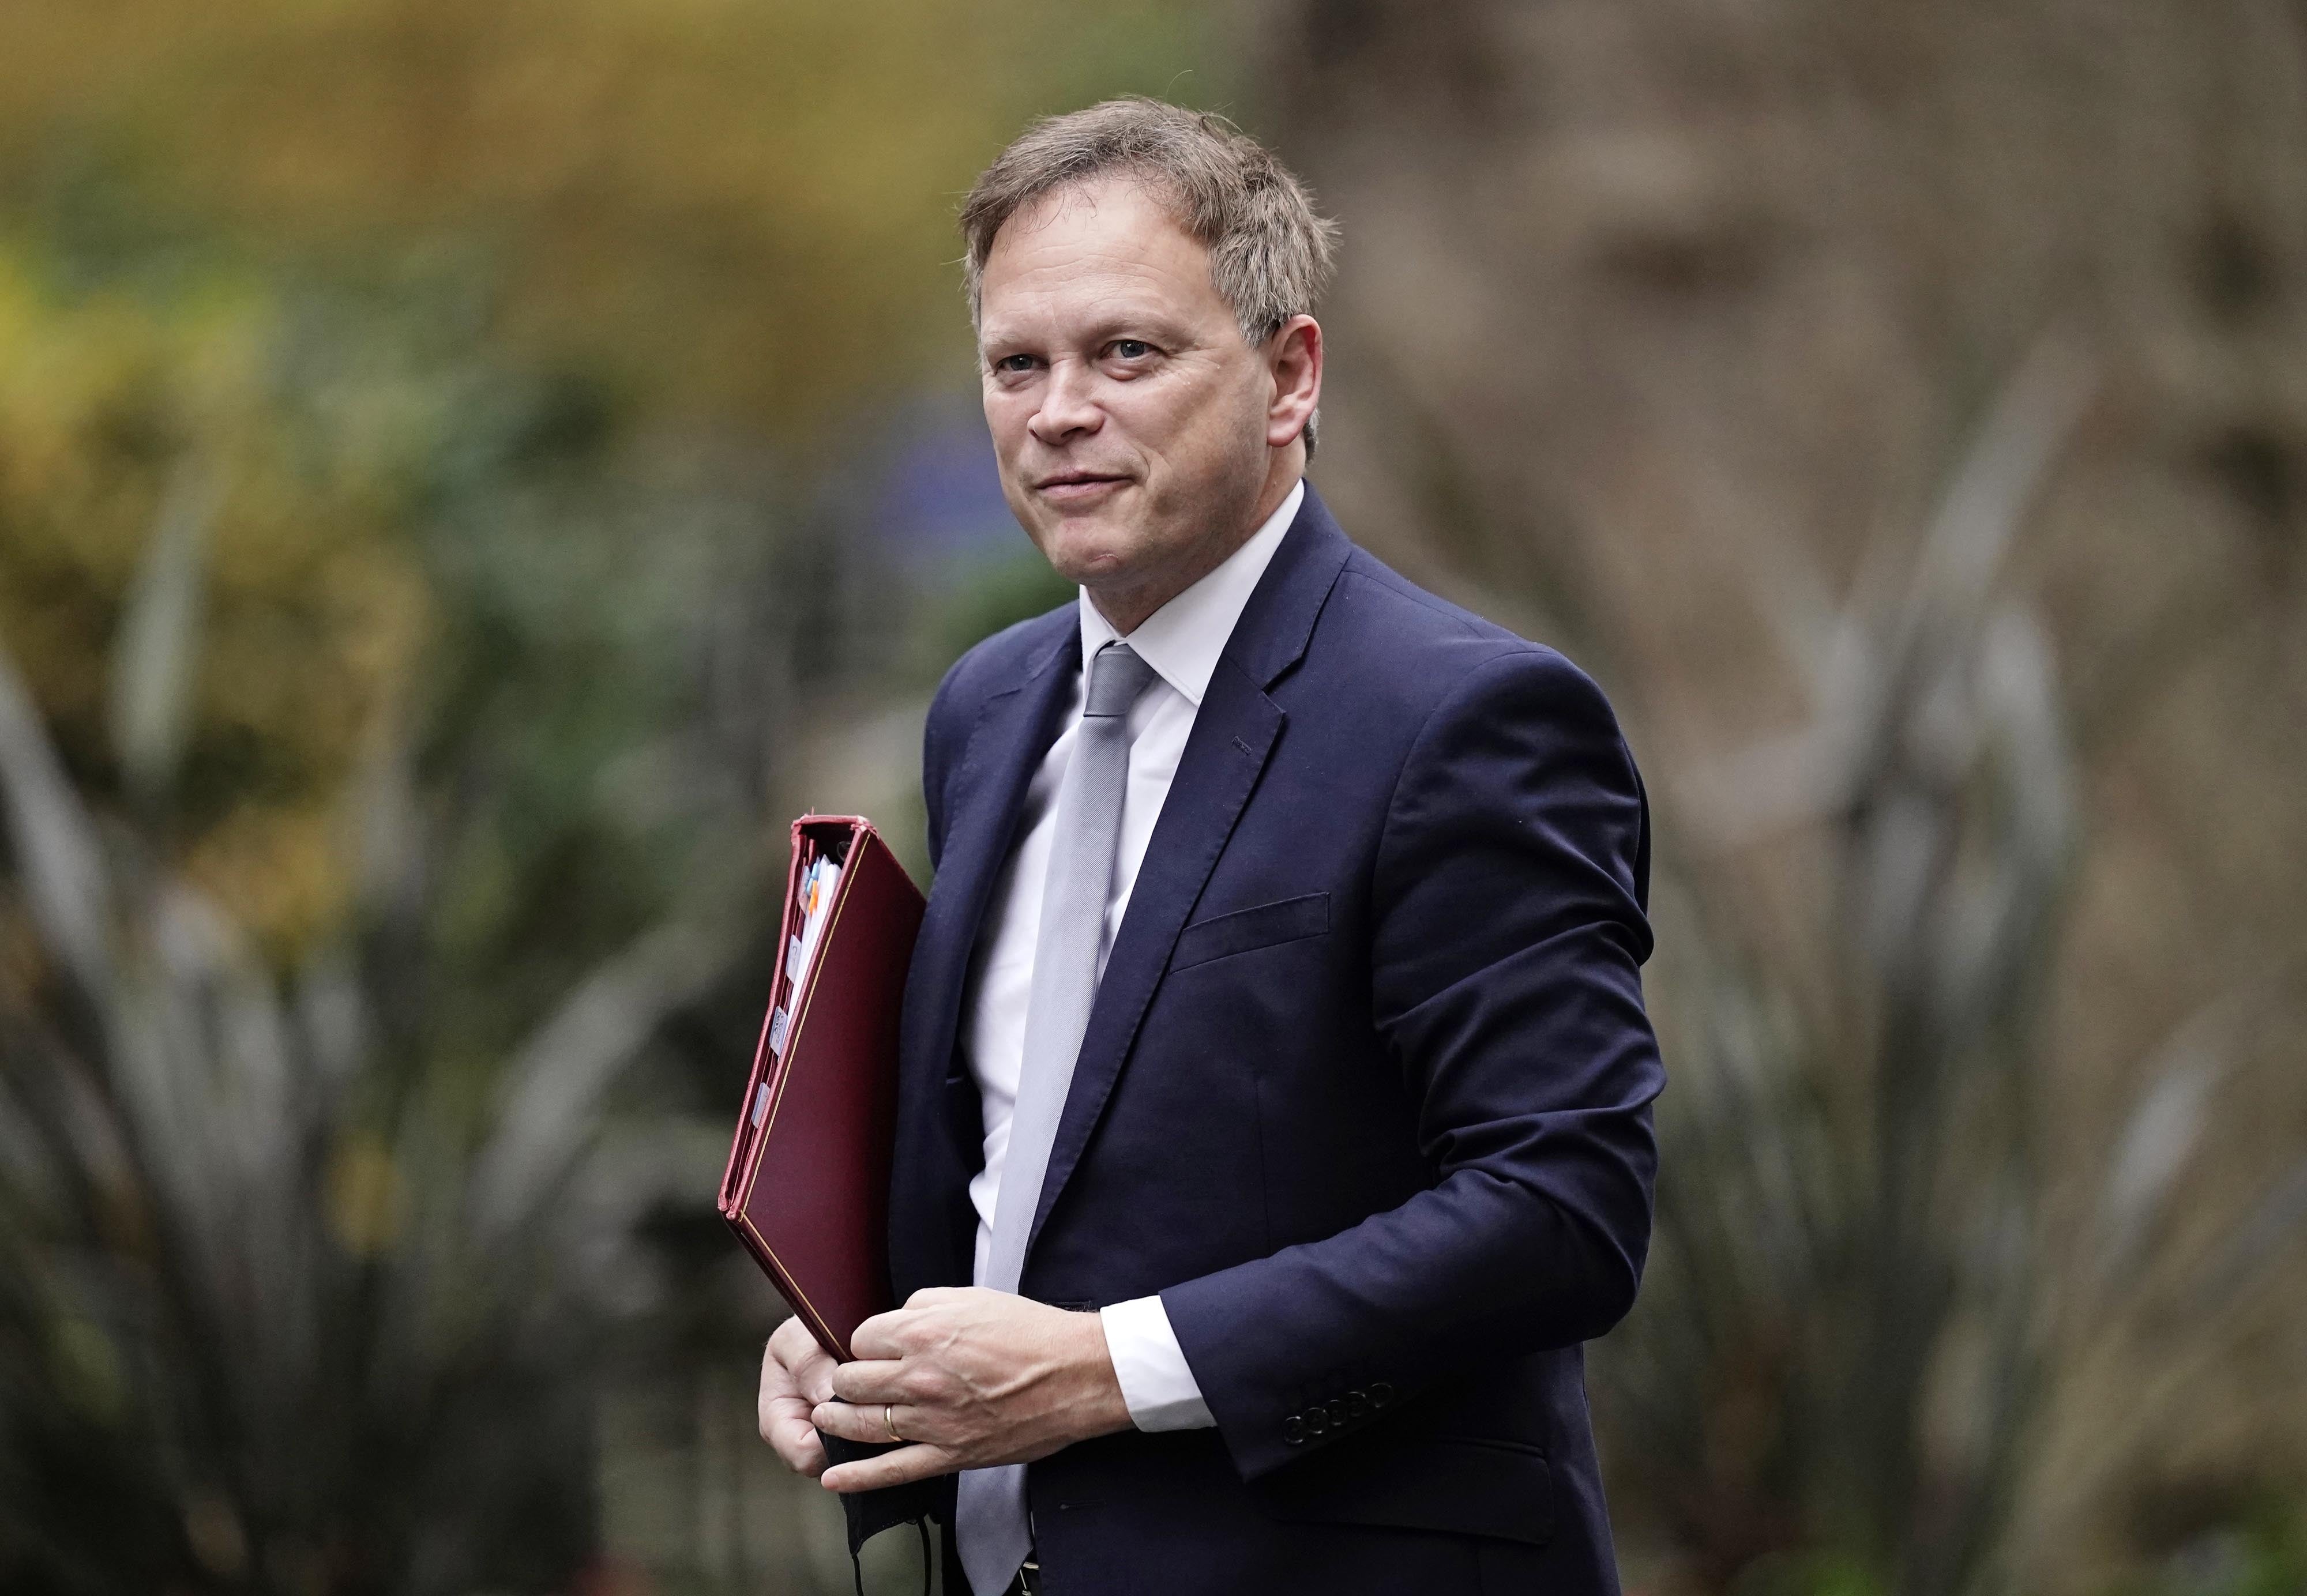 Grant Shapps has insisted it will never be acceptable to damage public property in Britain (Aaron Chown/PA)